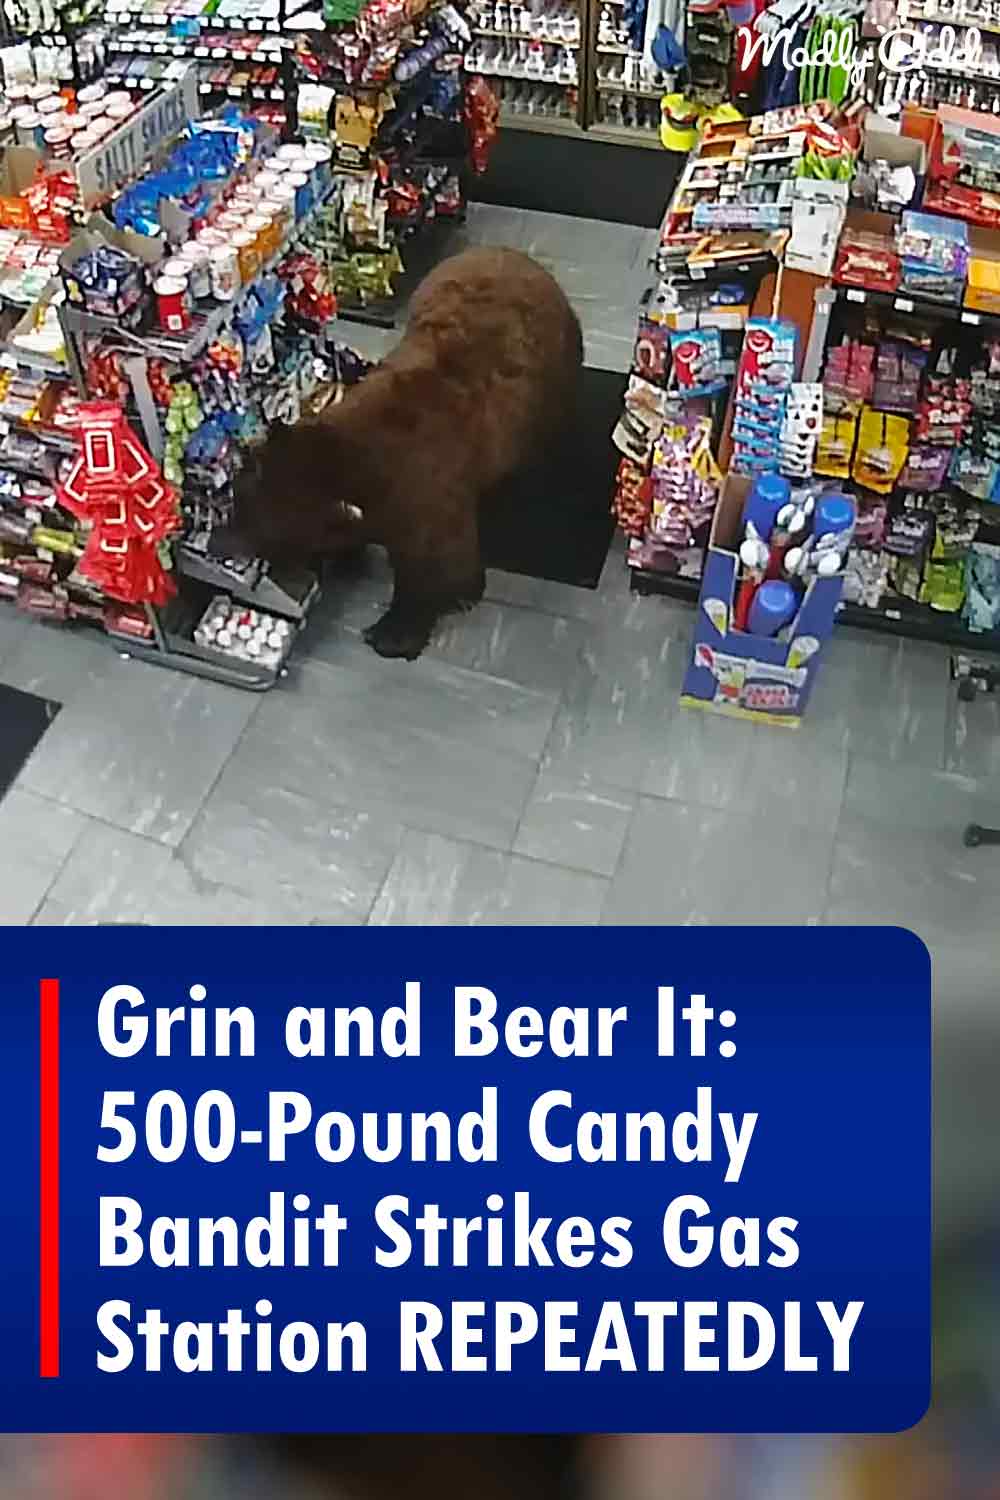 Grin and Bear It: 500-Pound Candy Bandit Strikes Gas Station REPEATEDLY